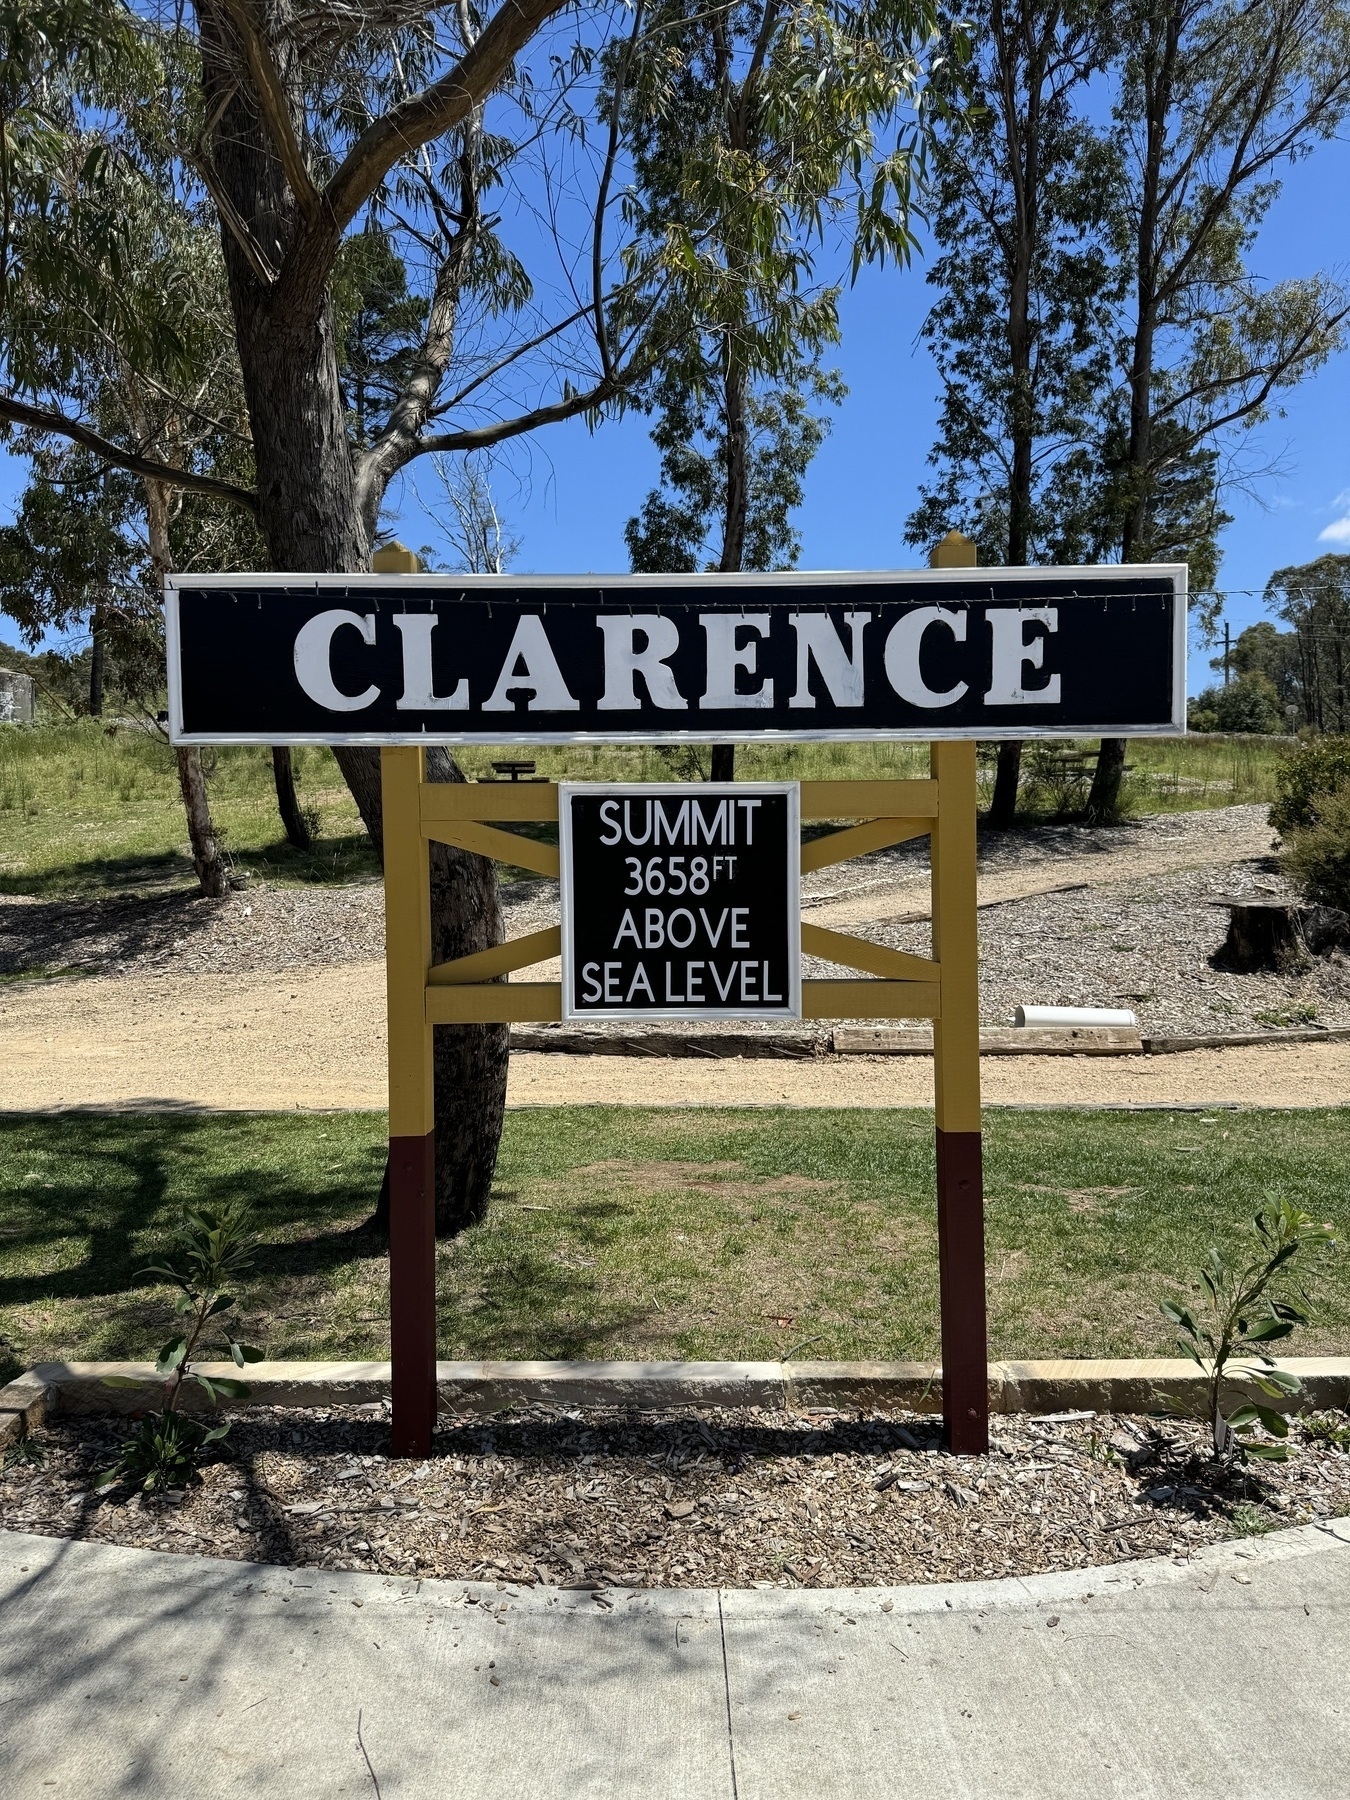 A sign at Clarence train station, showing it is 3,658 feet above sea level.